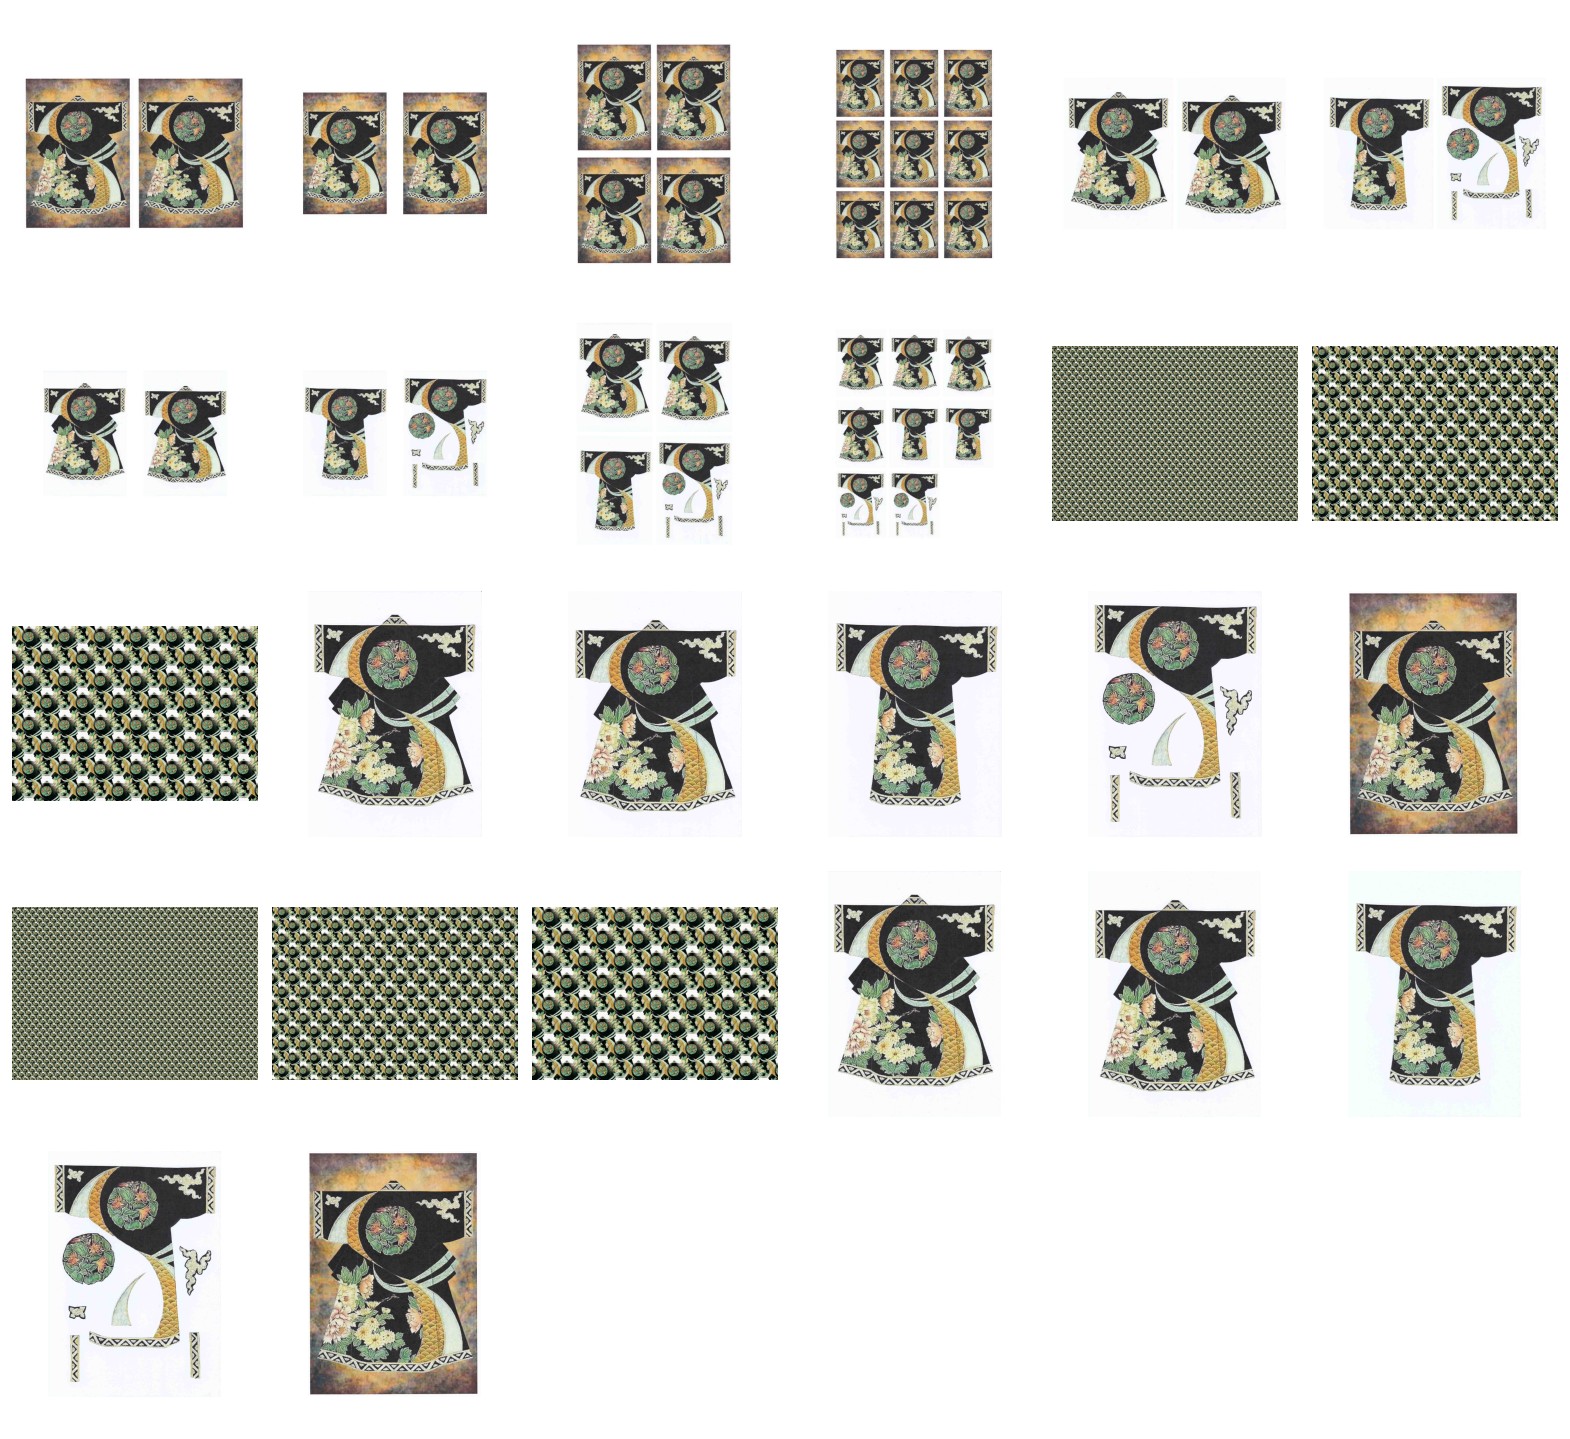 Kimono Set 16 Download - at least 24 Pages